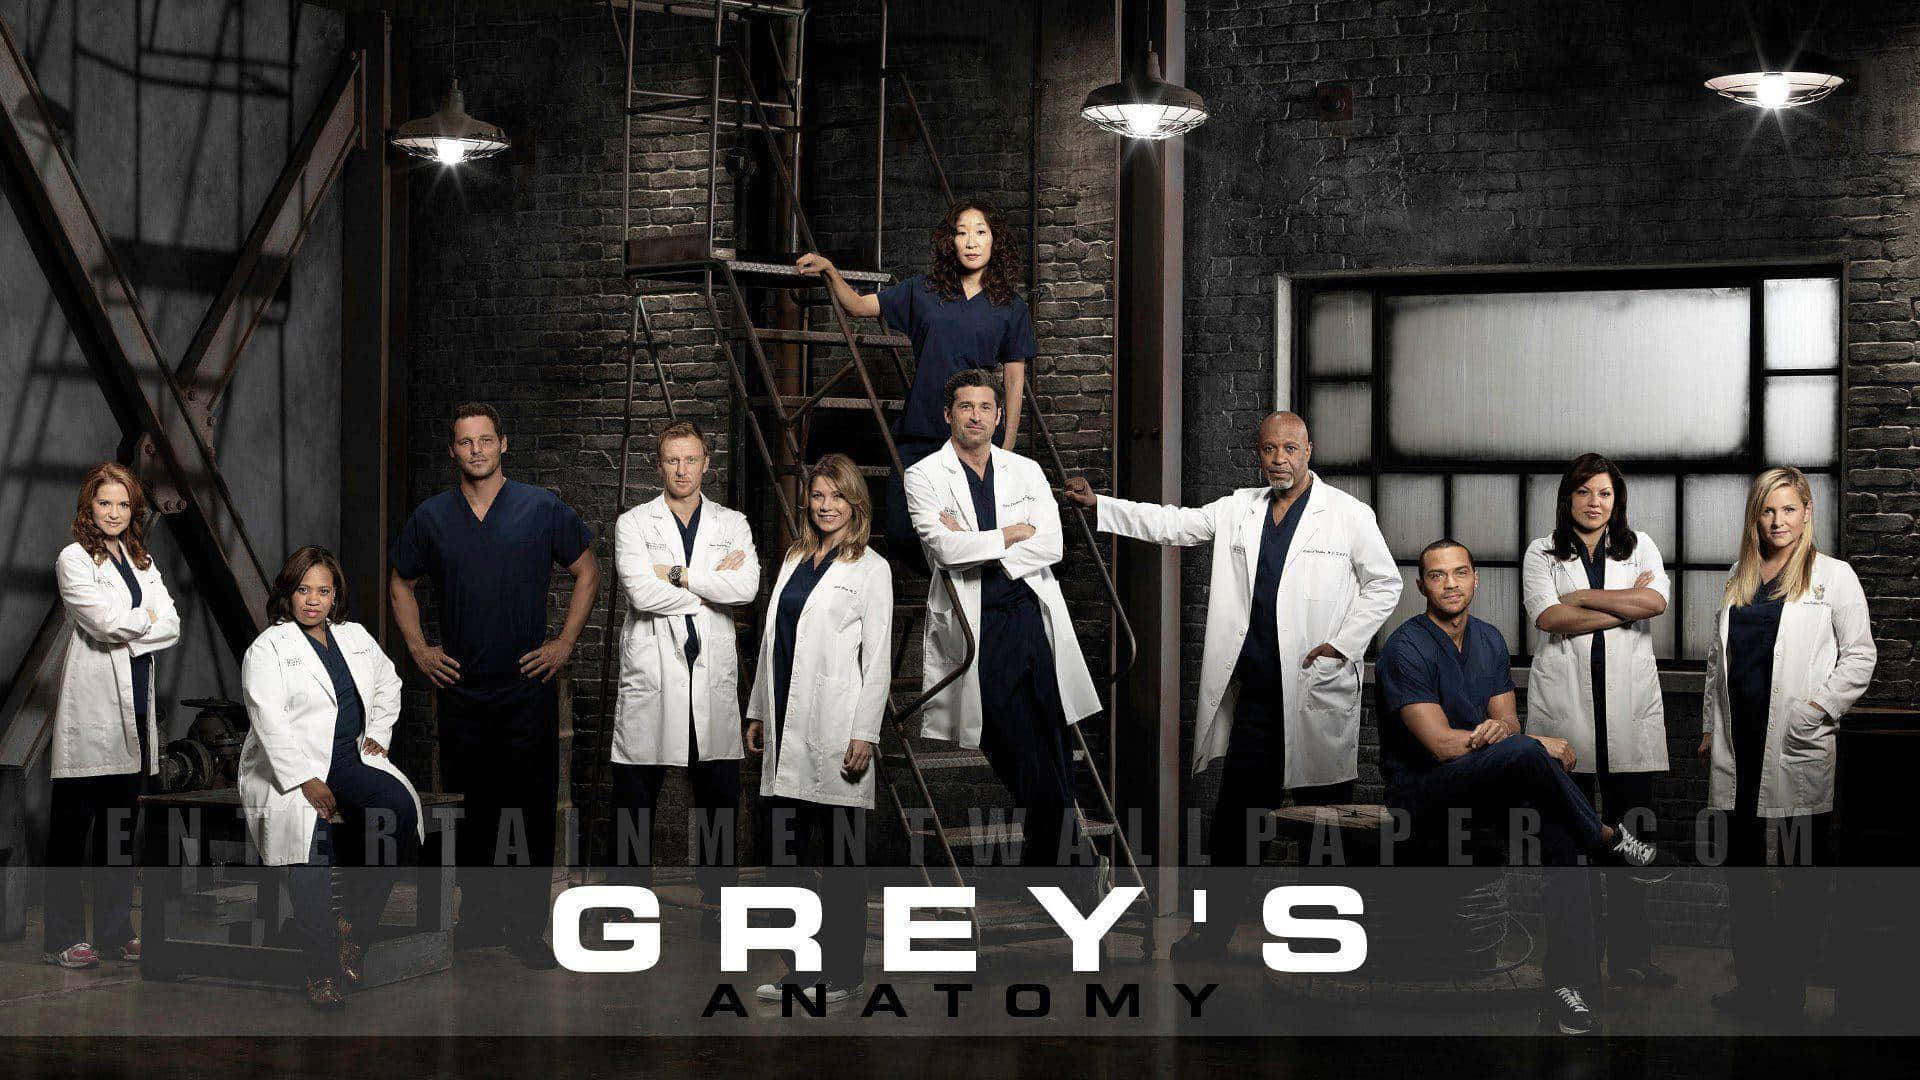 Relive the drama and life of Grey's Anatomy